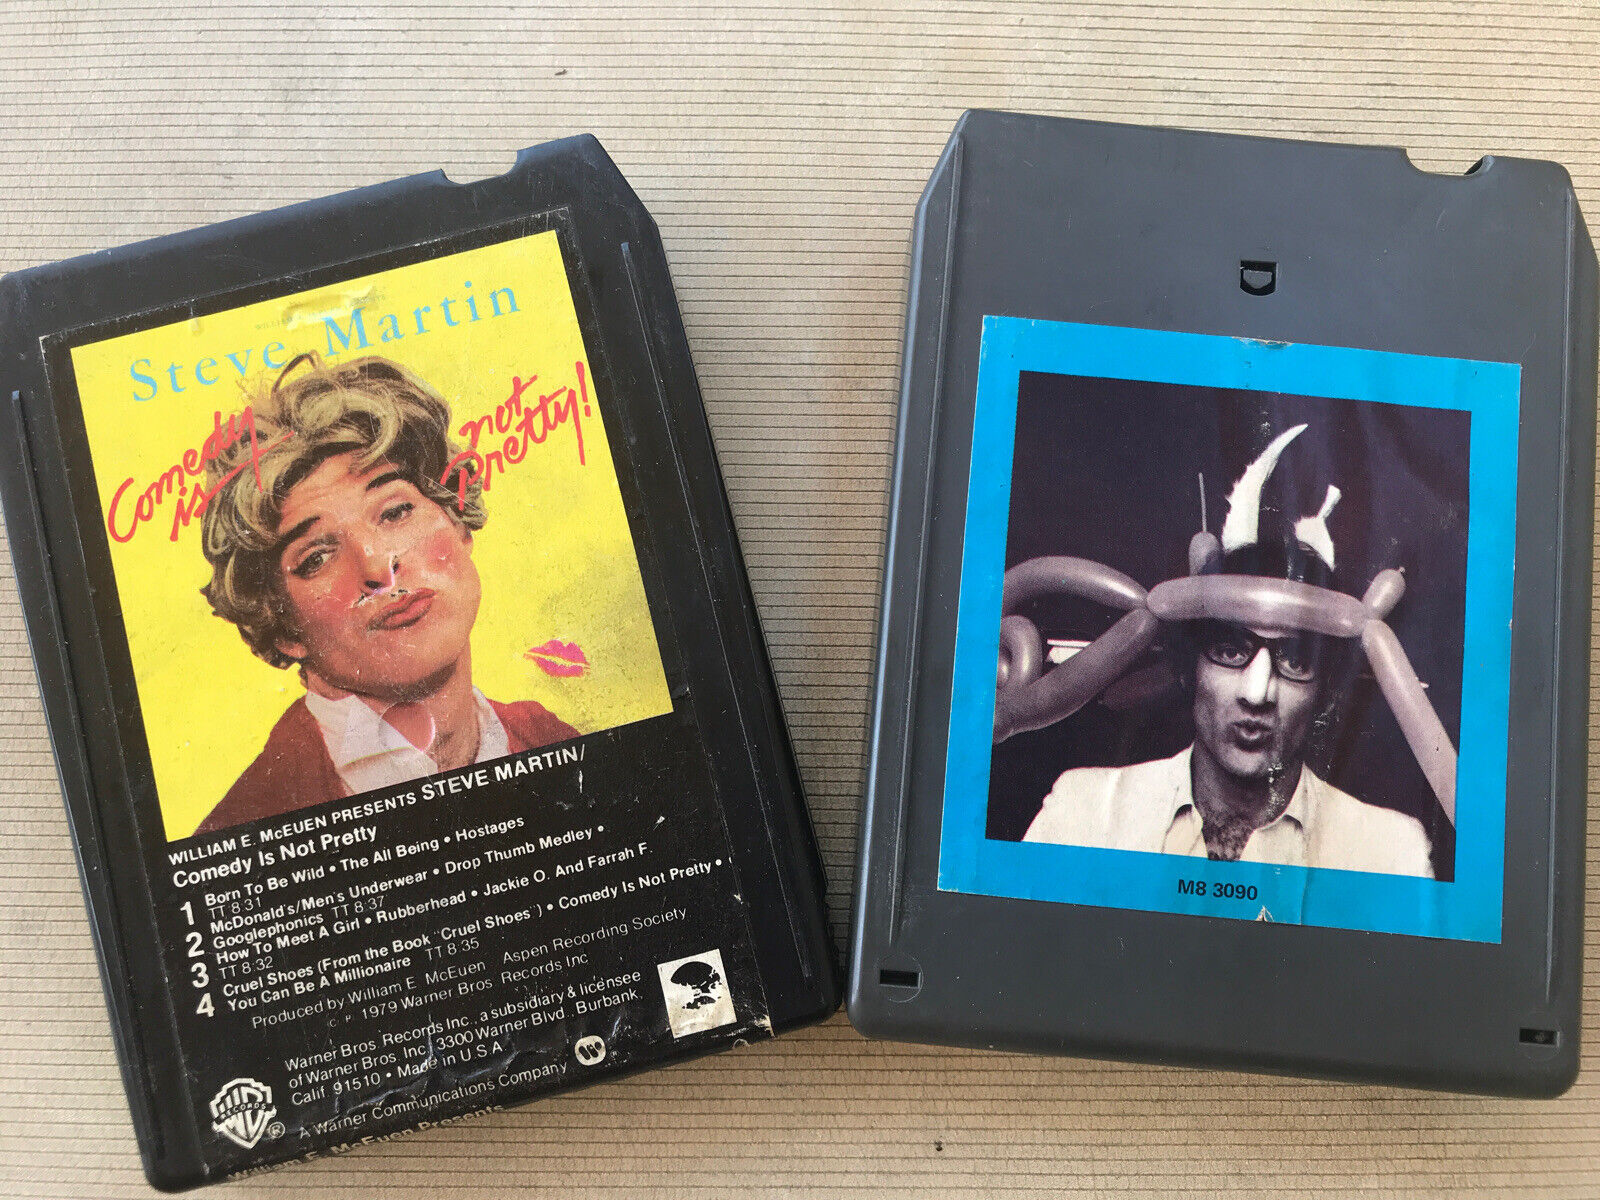 Lot (2) 8 Track Tapes by Steve Martin - Comedy Is Not Pretty & Let's Get Small Без бренда